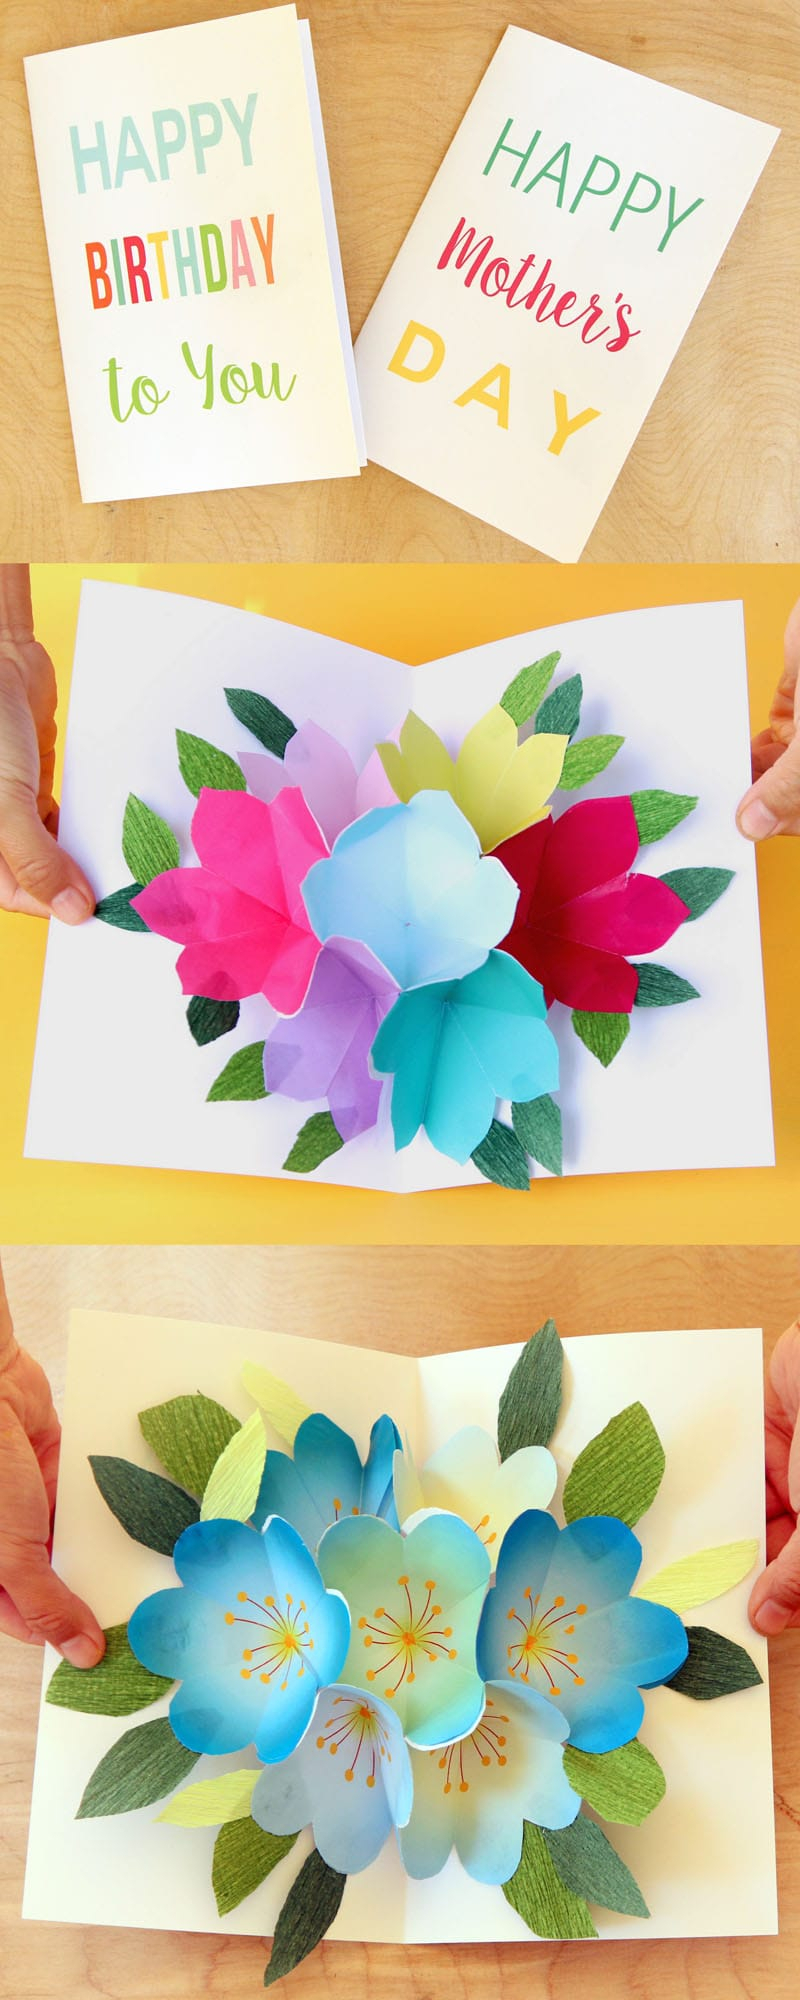 Birthday Pop Up Card Ideas Paper Craft Ideas For Greeting Cards Free Printable Happy Birthday